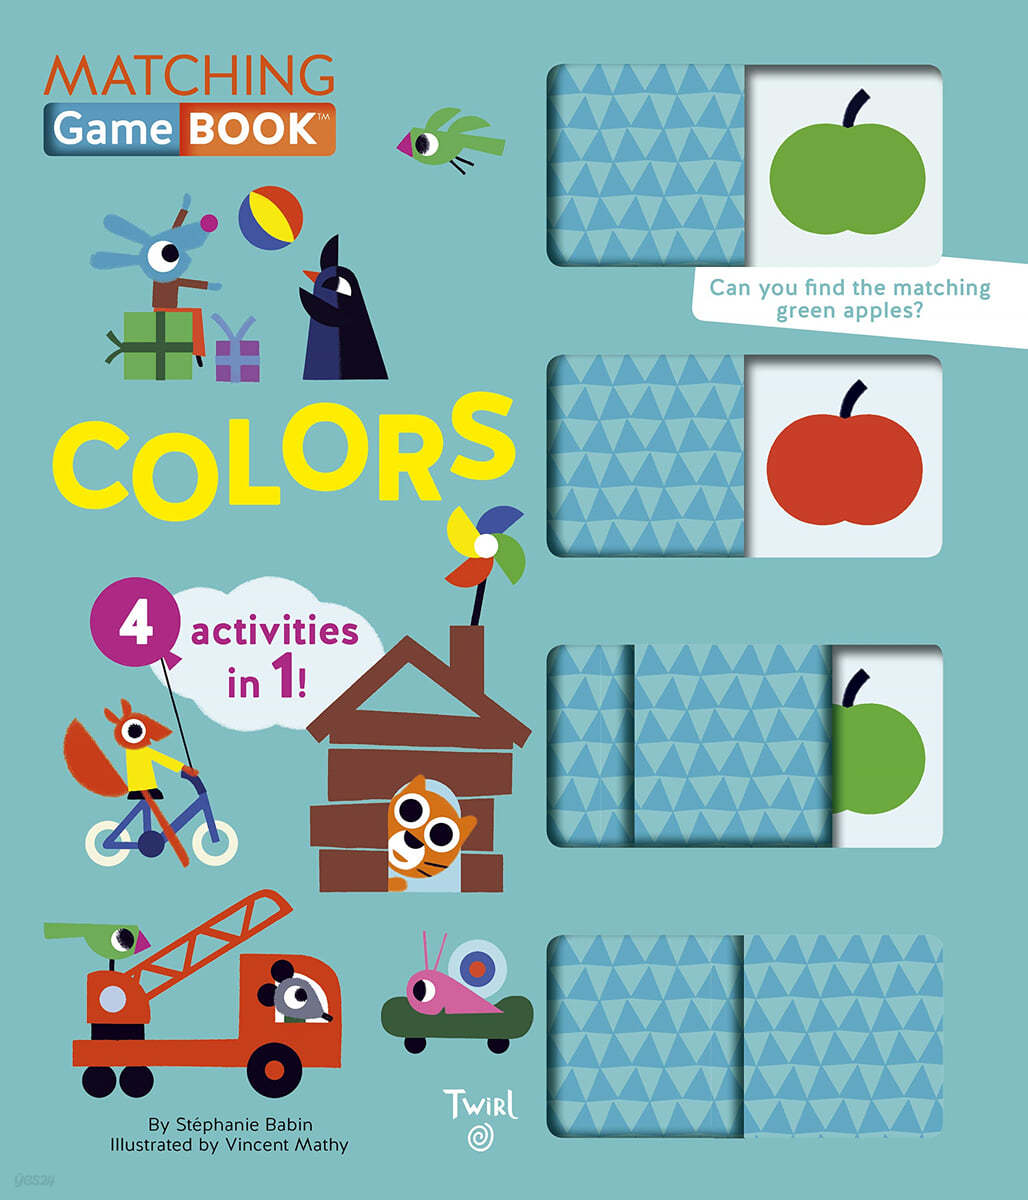 Matching Game Book - Colors